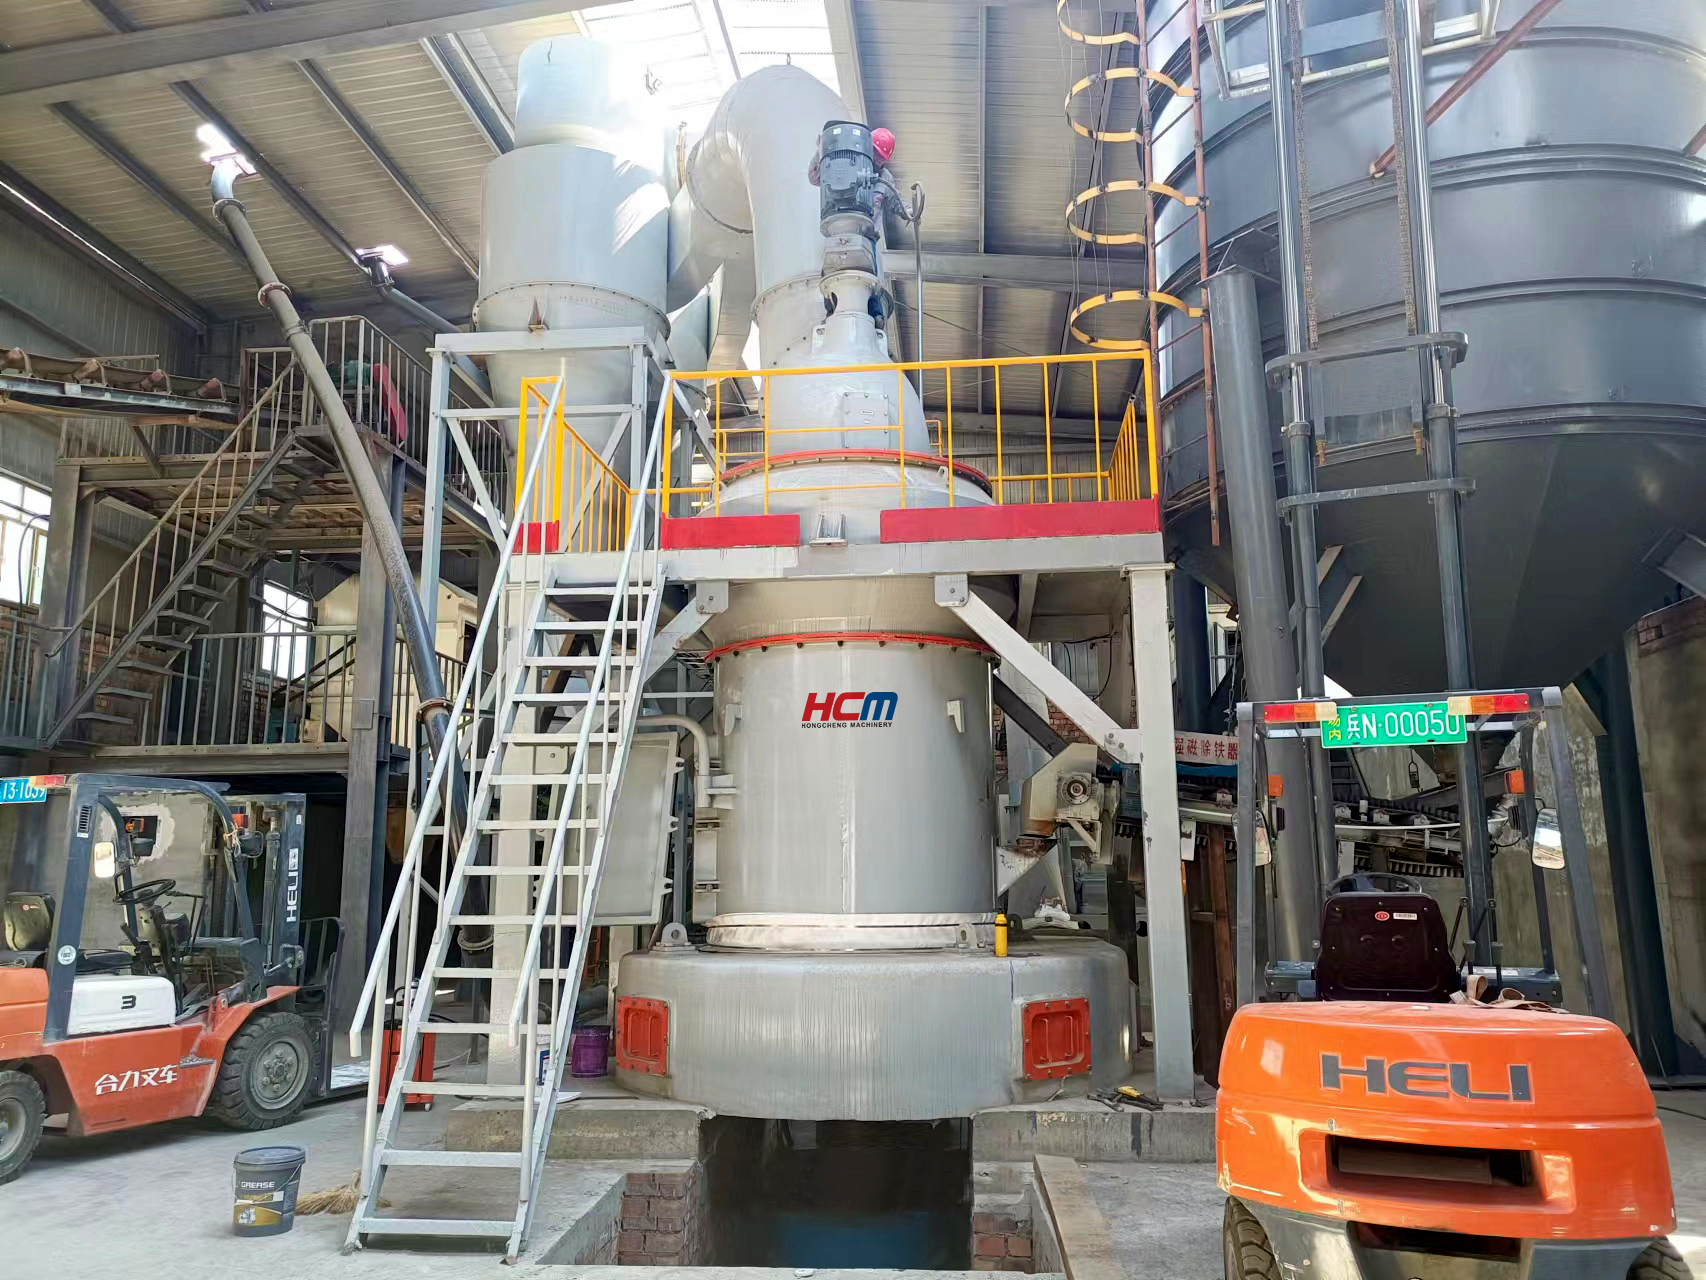 【Raymond mill popularization】What kind of machine is Raymond mill? What can it be used for?